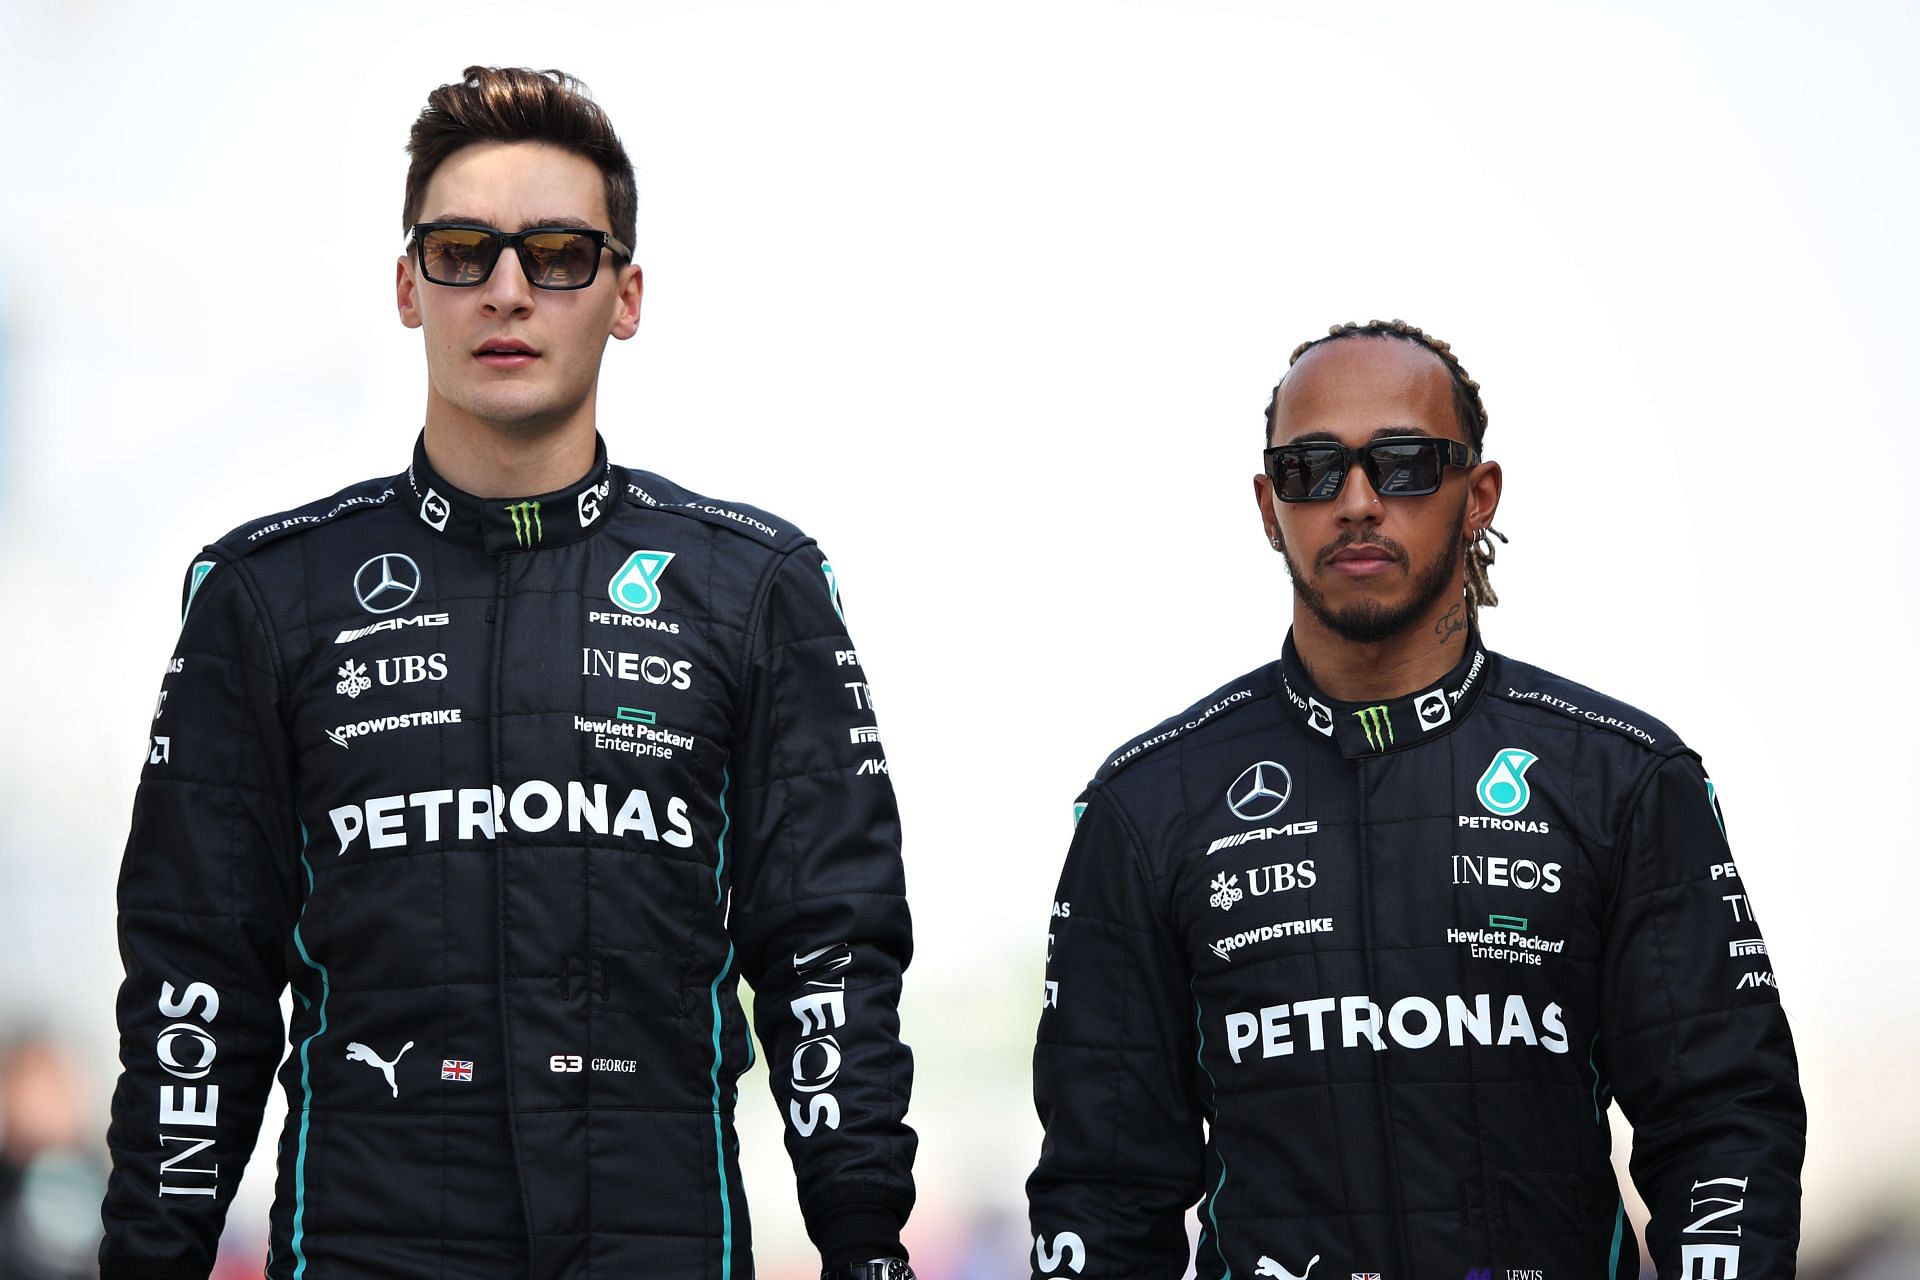 George Russell (left) and Lewis Hamilton (right) during Formula 1 Testing in Bahrain - Day 1